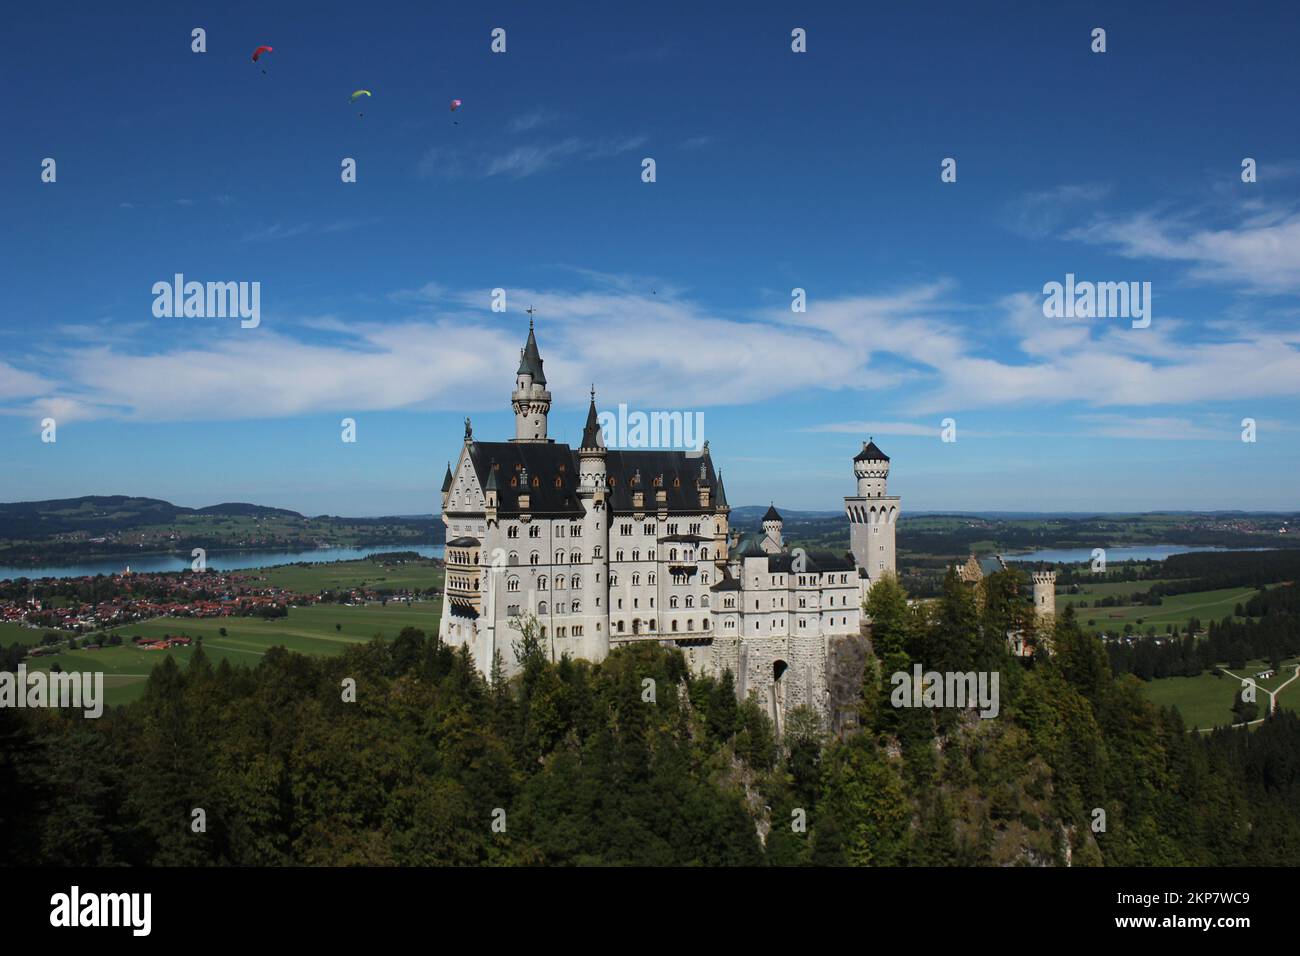 The Neuschwanstein Castle surrounded by trees with a cloudy blue sky background Stock Photo